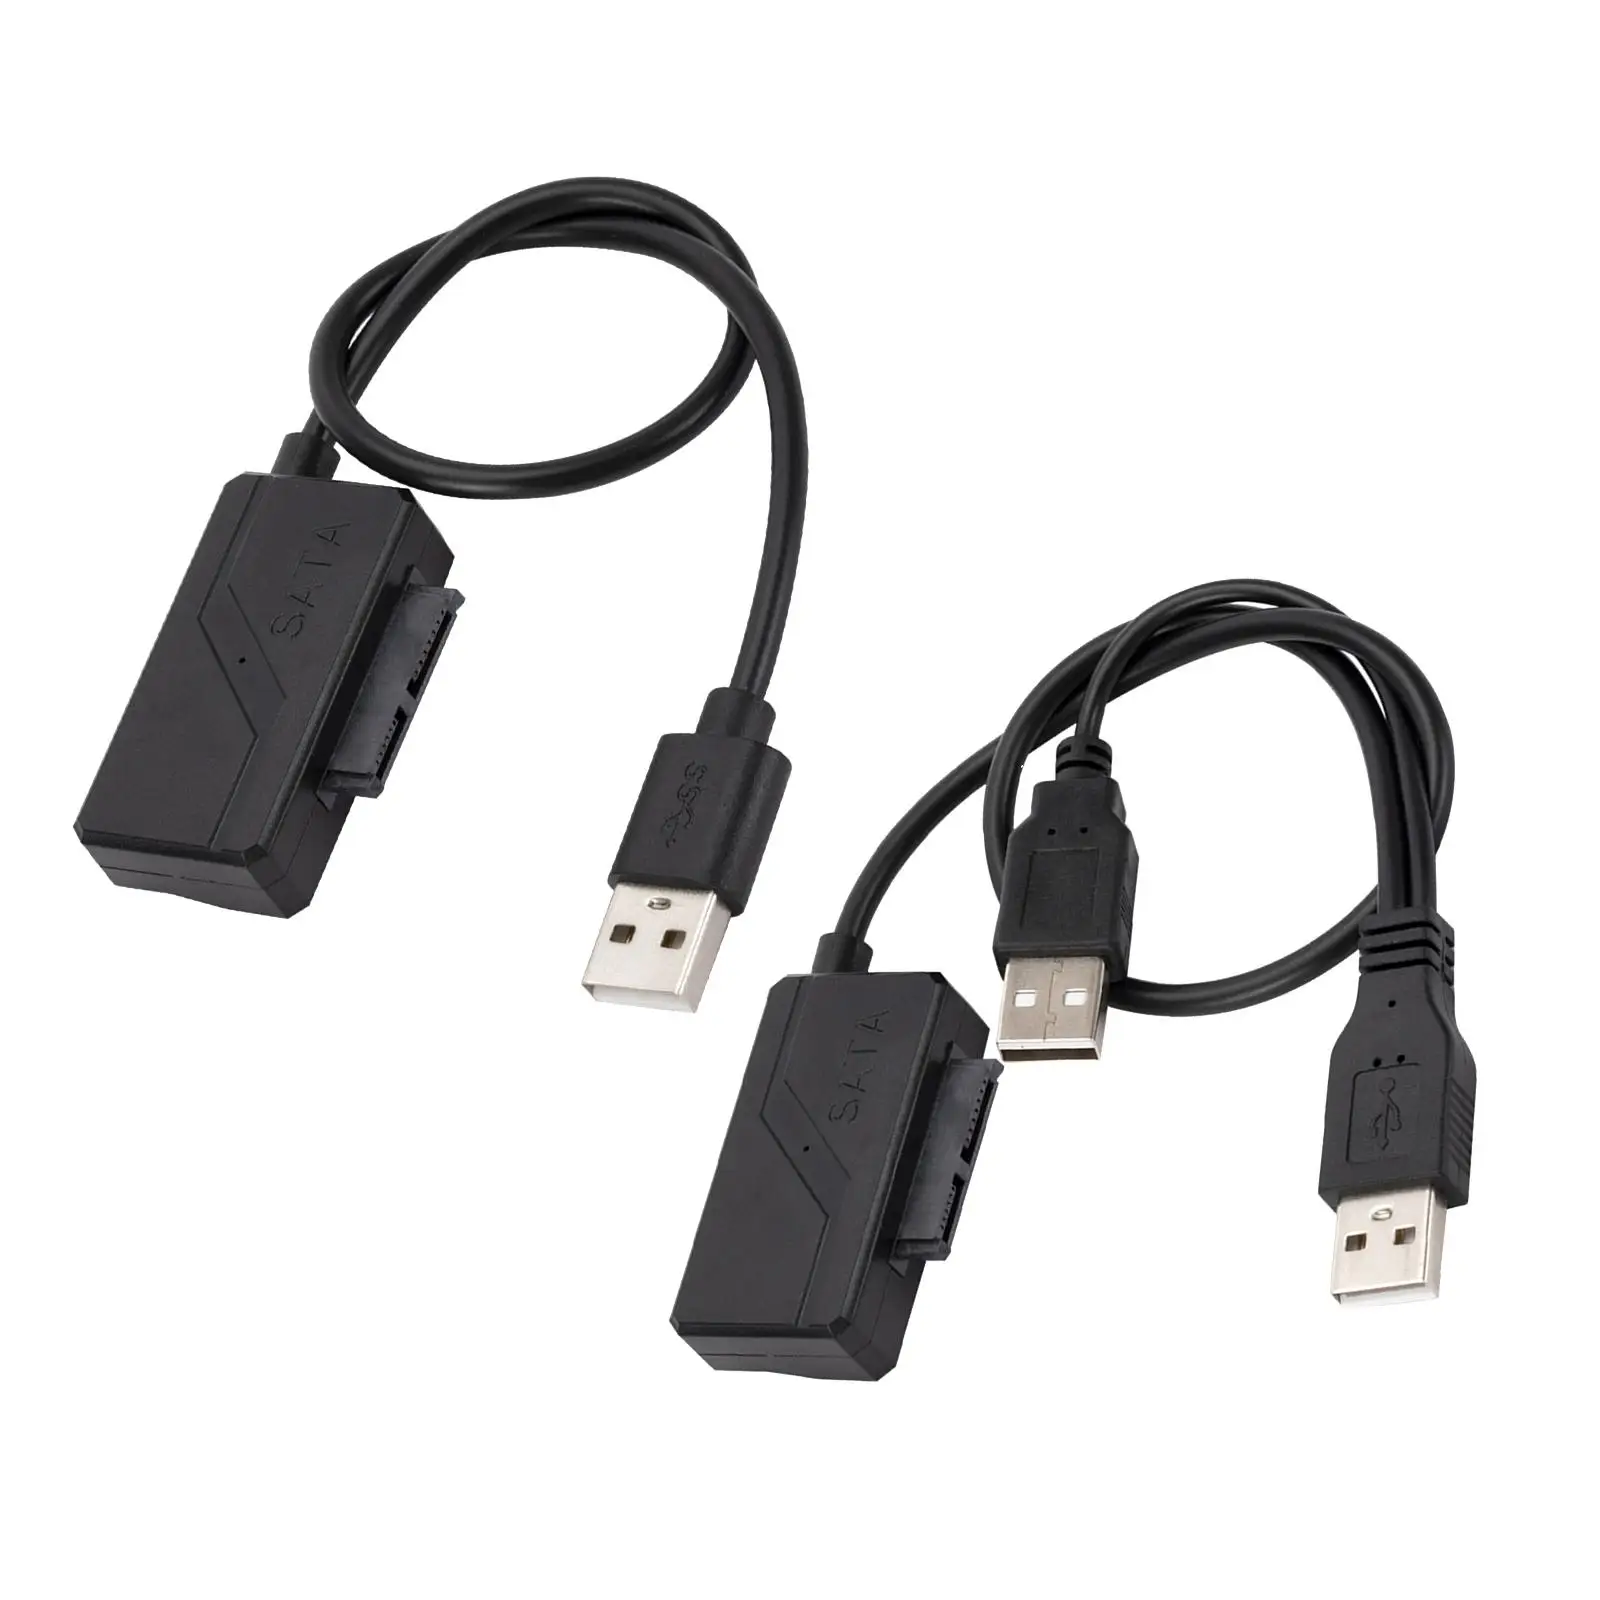 USB 2.0 to SATA 7+6 13Pin Adapter Cable Optical Drive Plug and Play Transfer Cord for Laptop Cd-Rom Dvd-Rom Electronics